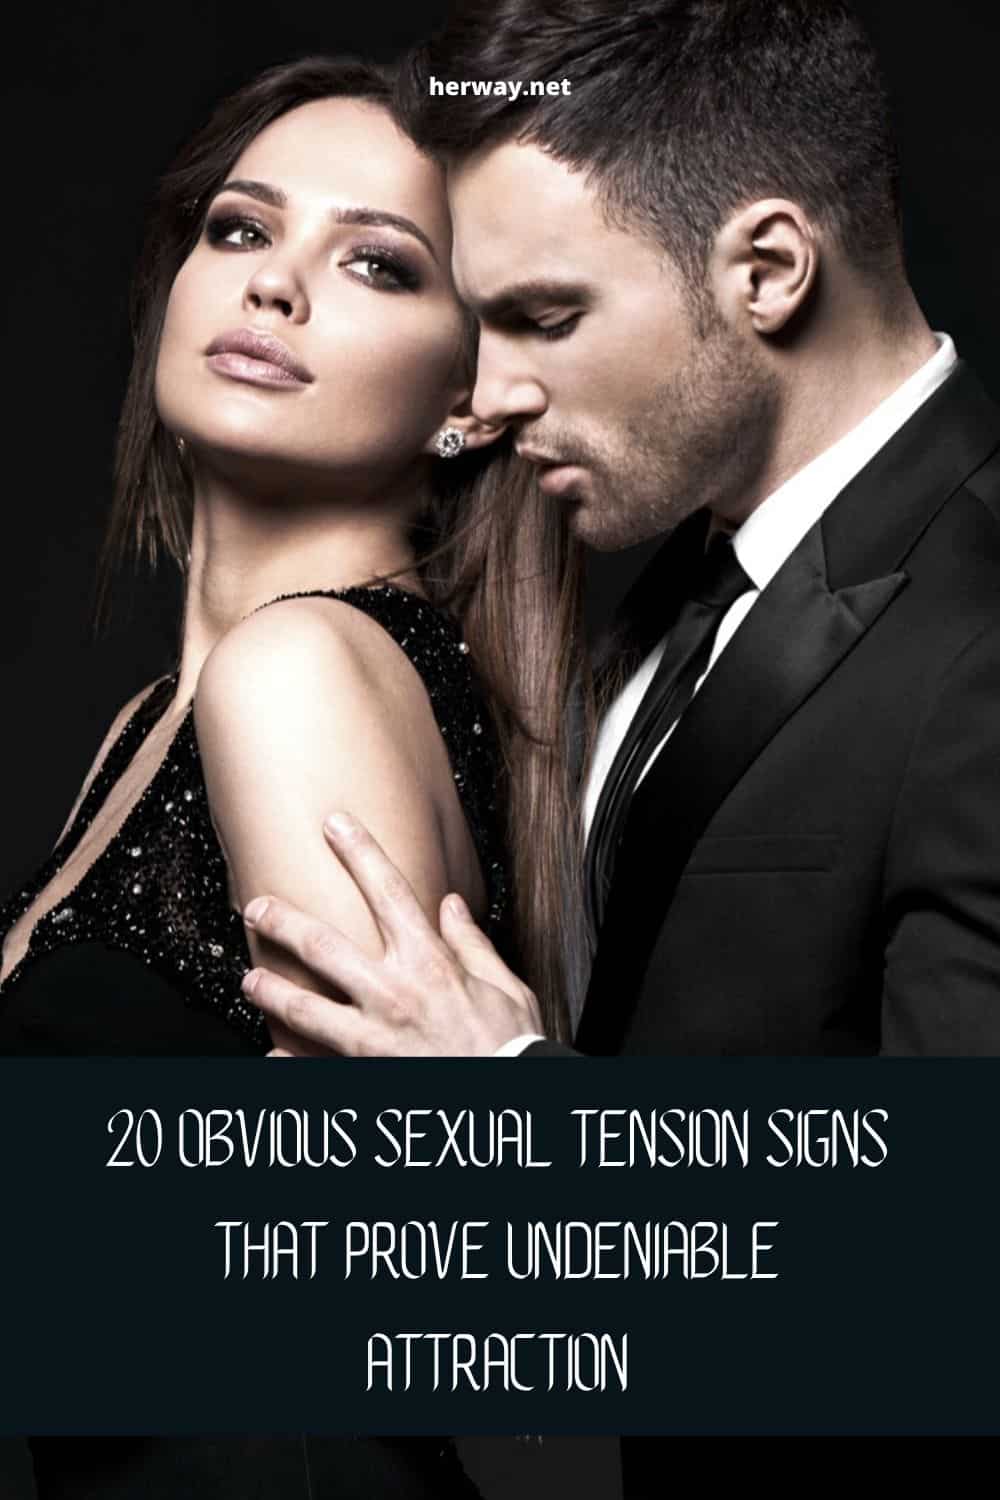 20 Obvious Sexual Tension Signs That Prove Undeniable Attraction